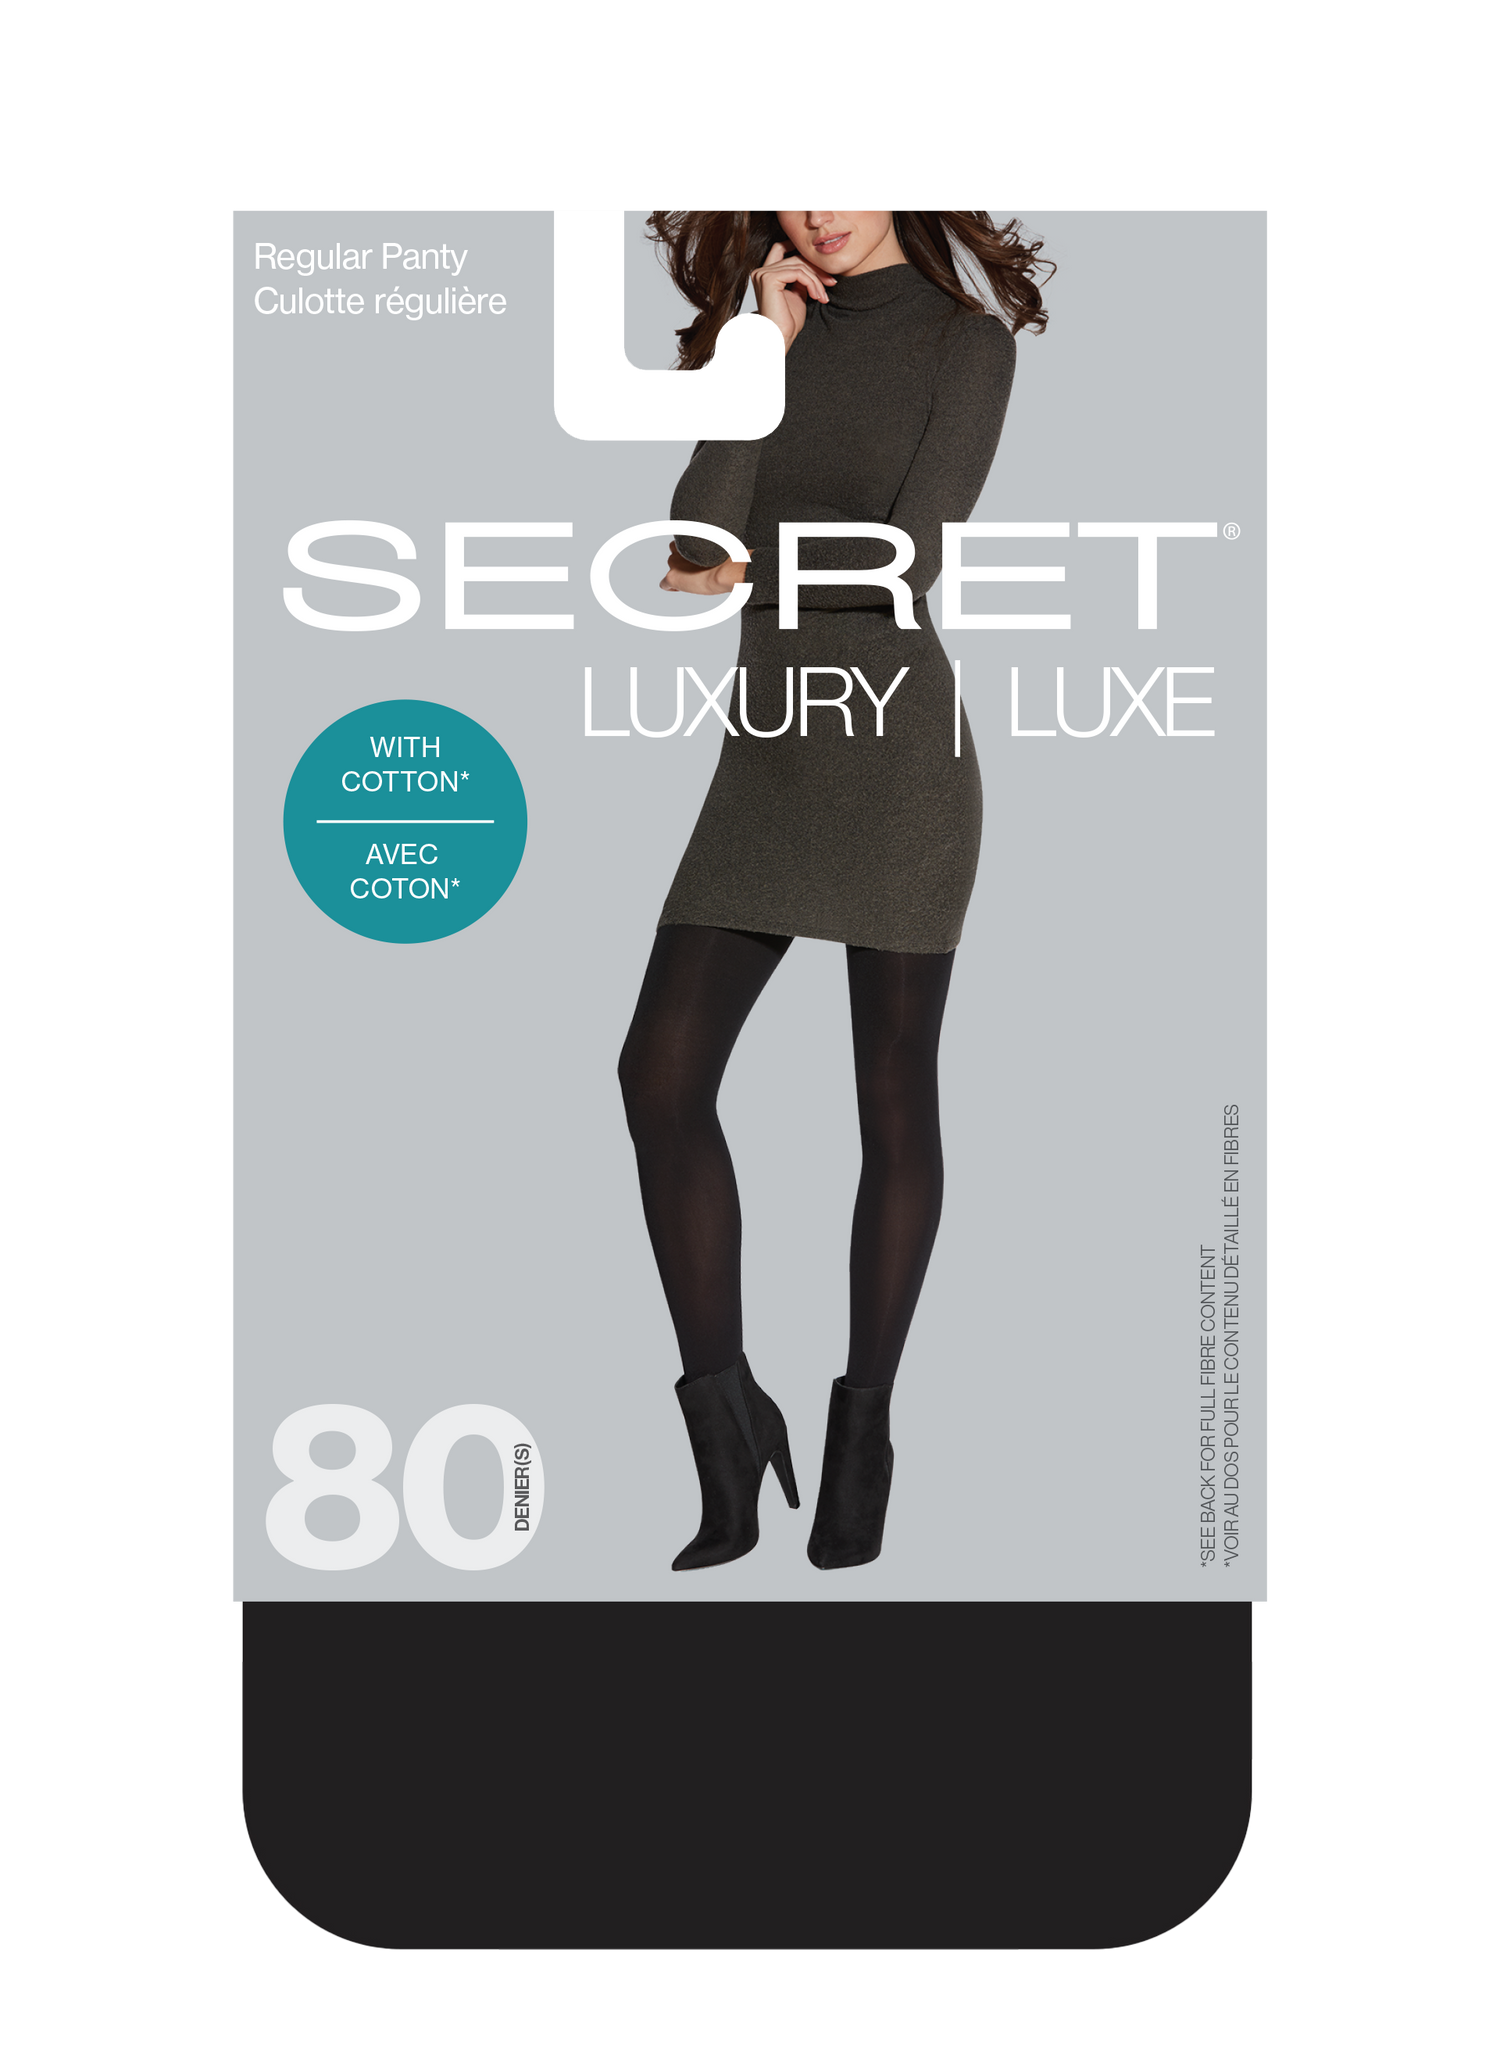 SECRET® LUXURY Super Opaque Cotton Tights | 80 Denier Sheer Black Tights With a Regular Panty